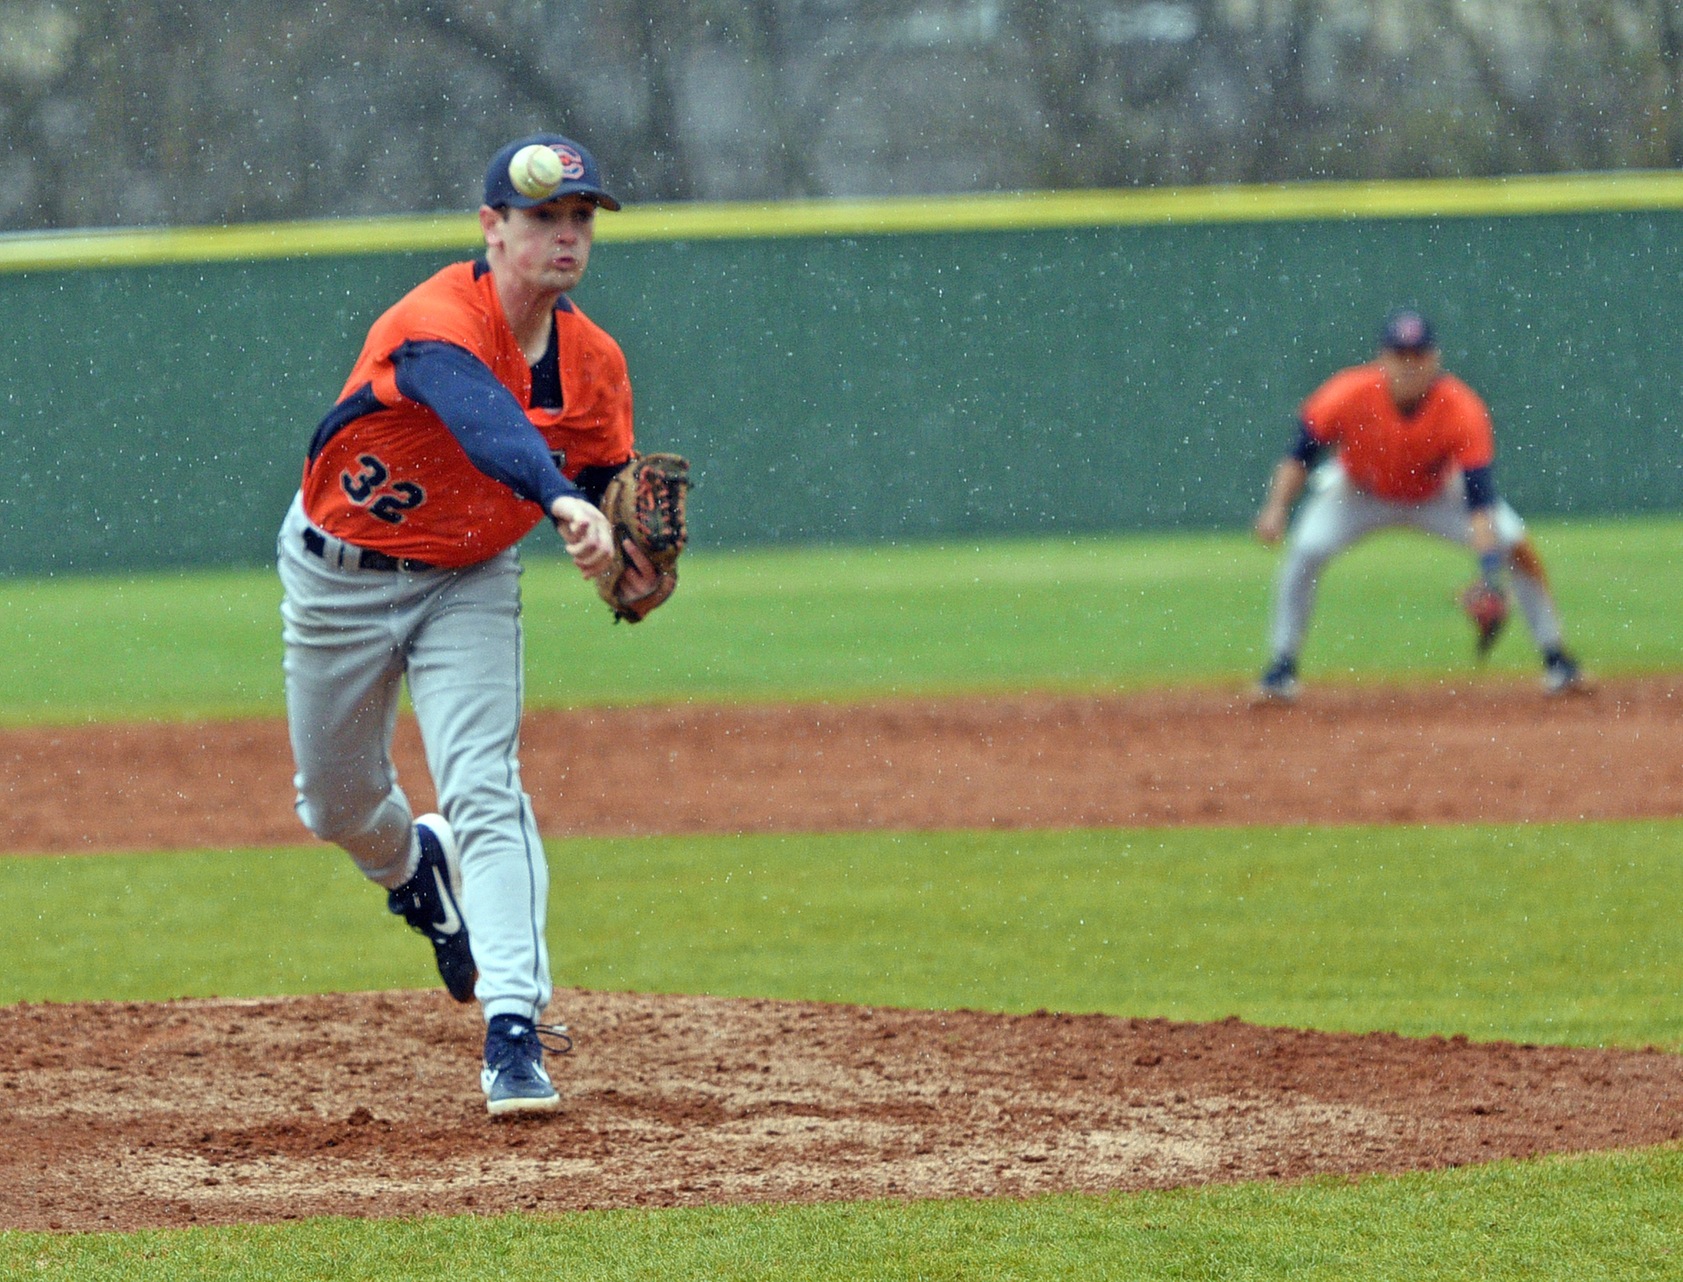 Beamish’s two-out homer sinks Eagles